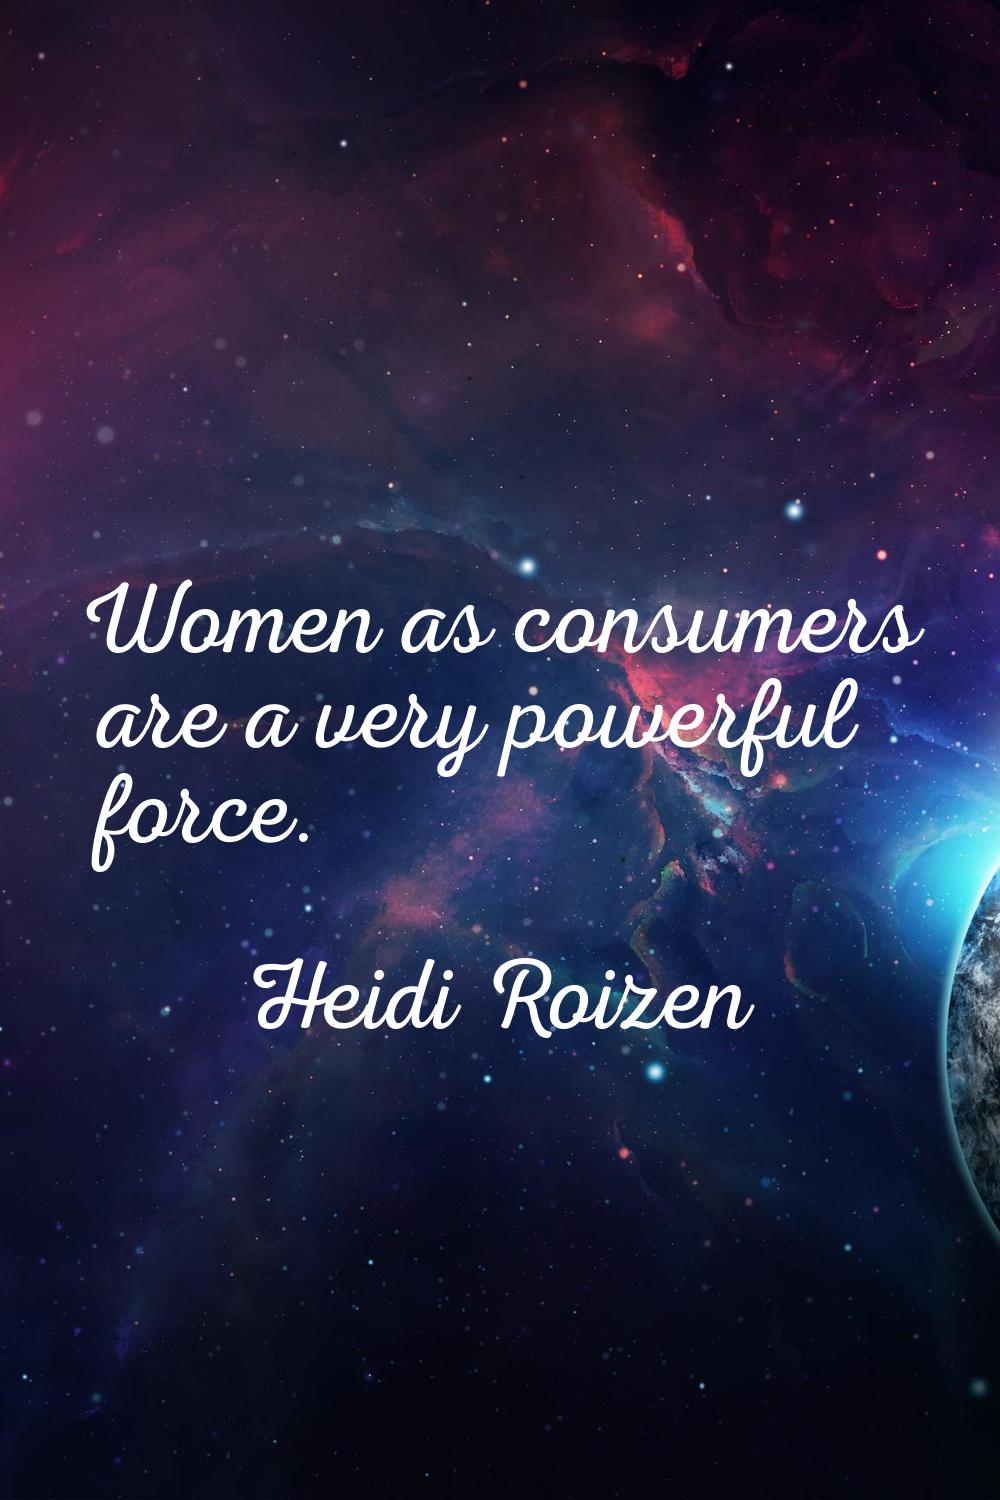 Women as consumers are a very powerful force.